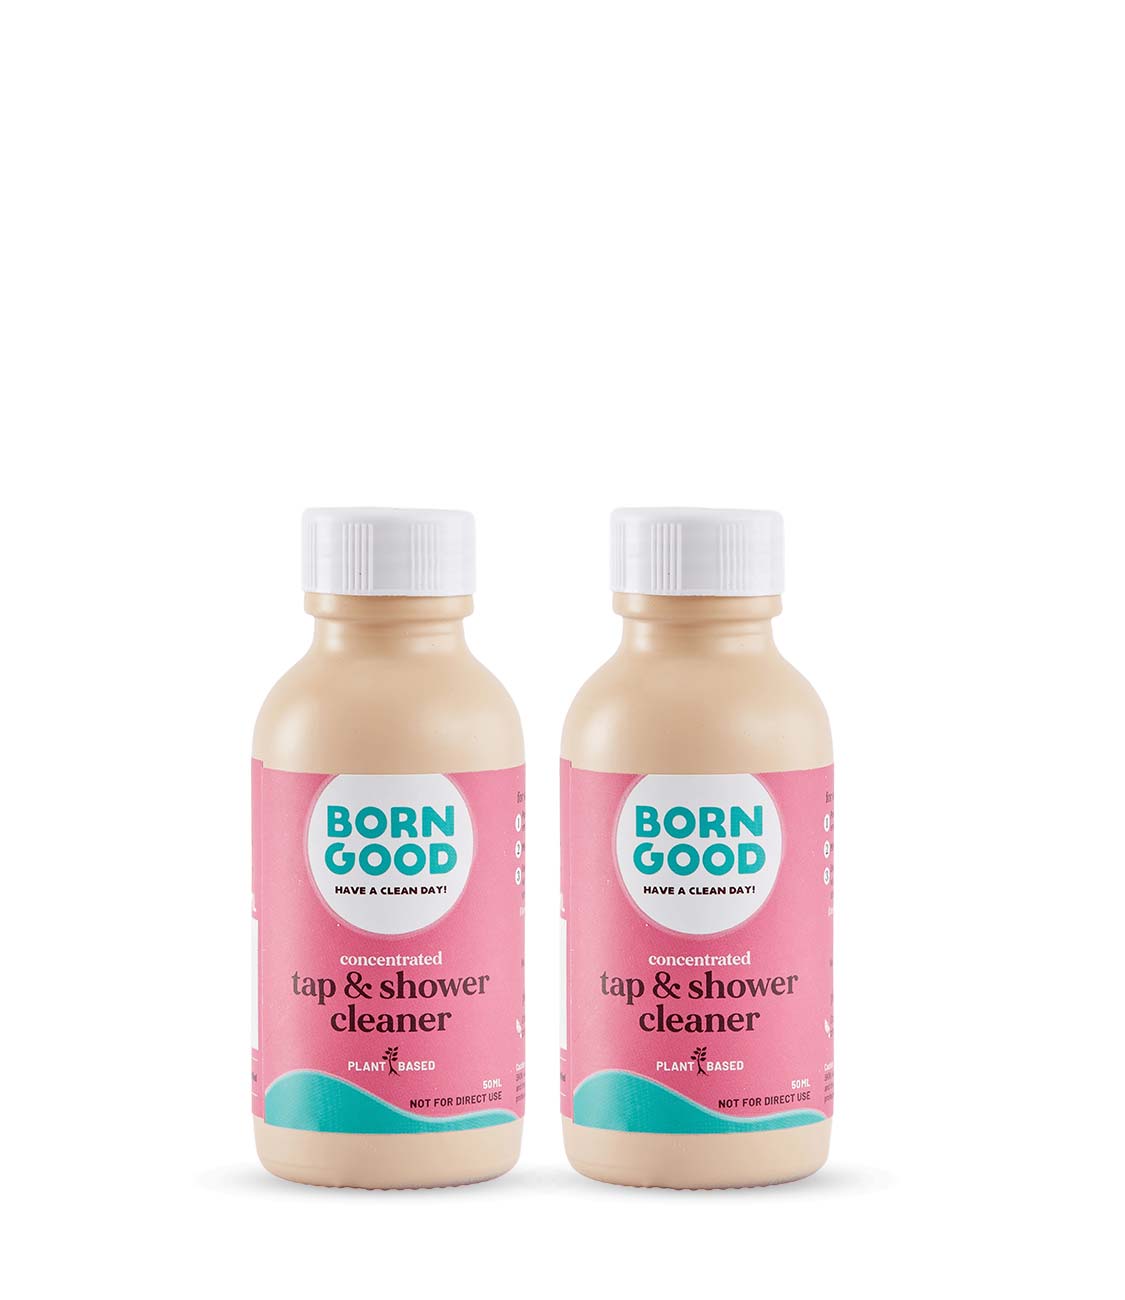 Born Good Plant-based Tap & Shower Cleaner Concentrate 50ml x 2 (Makes 1 L)